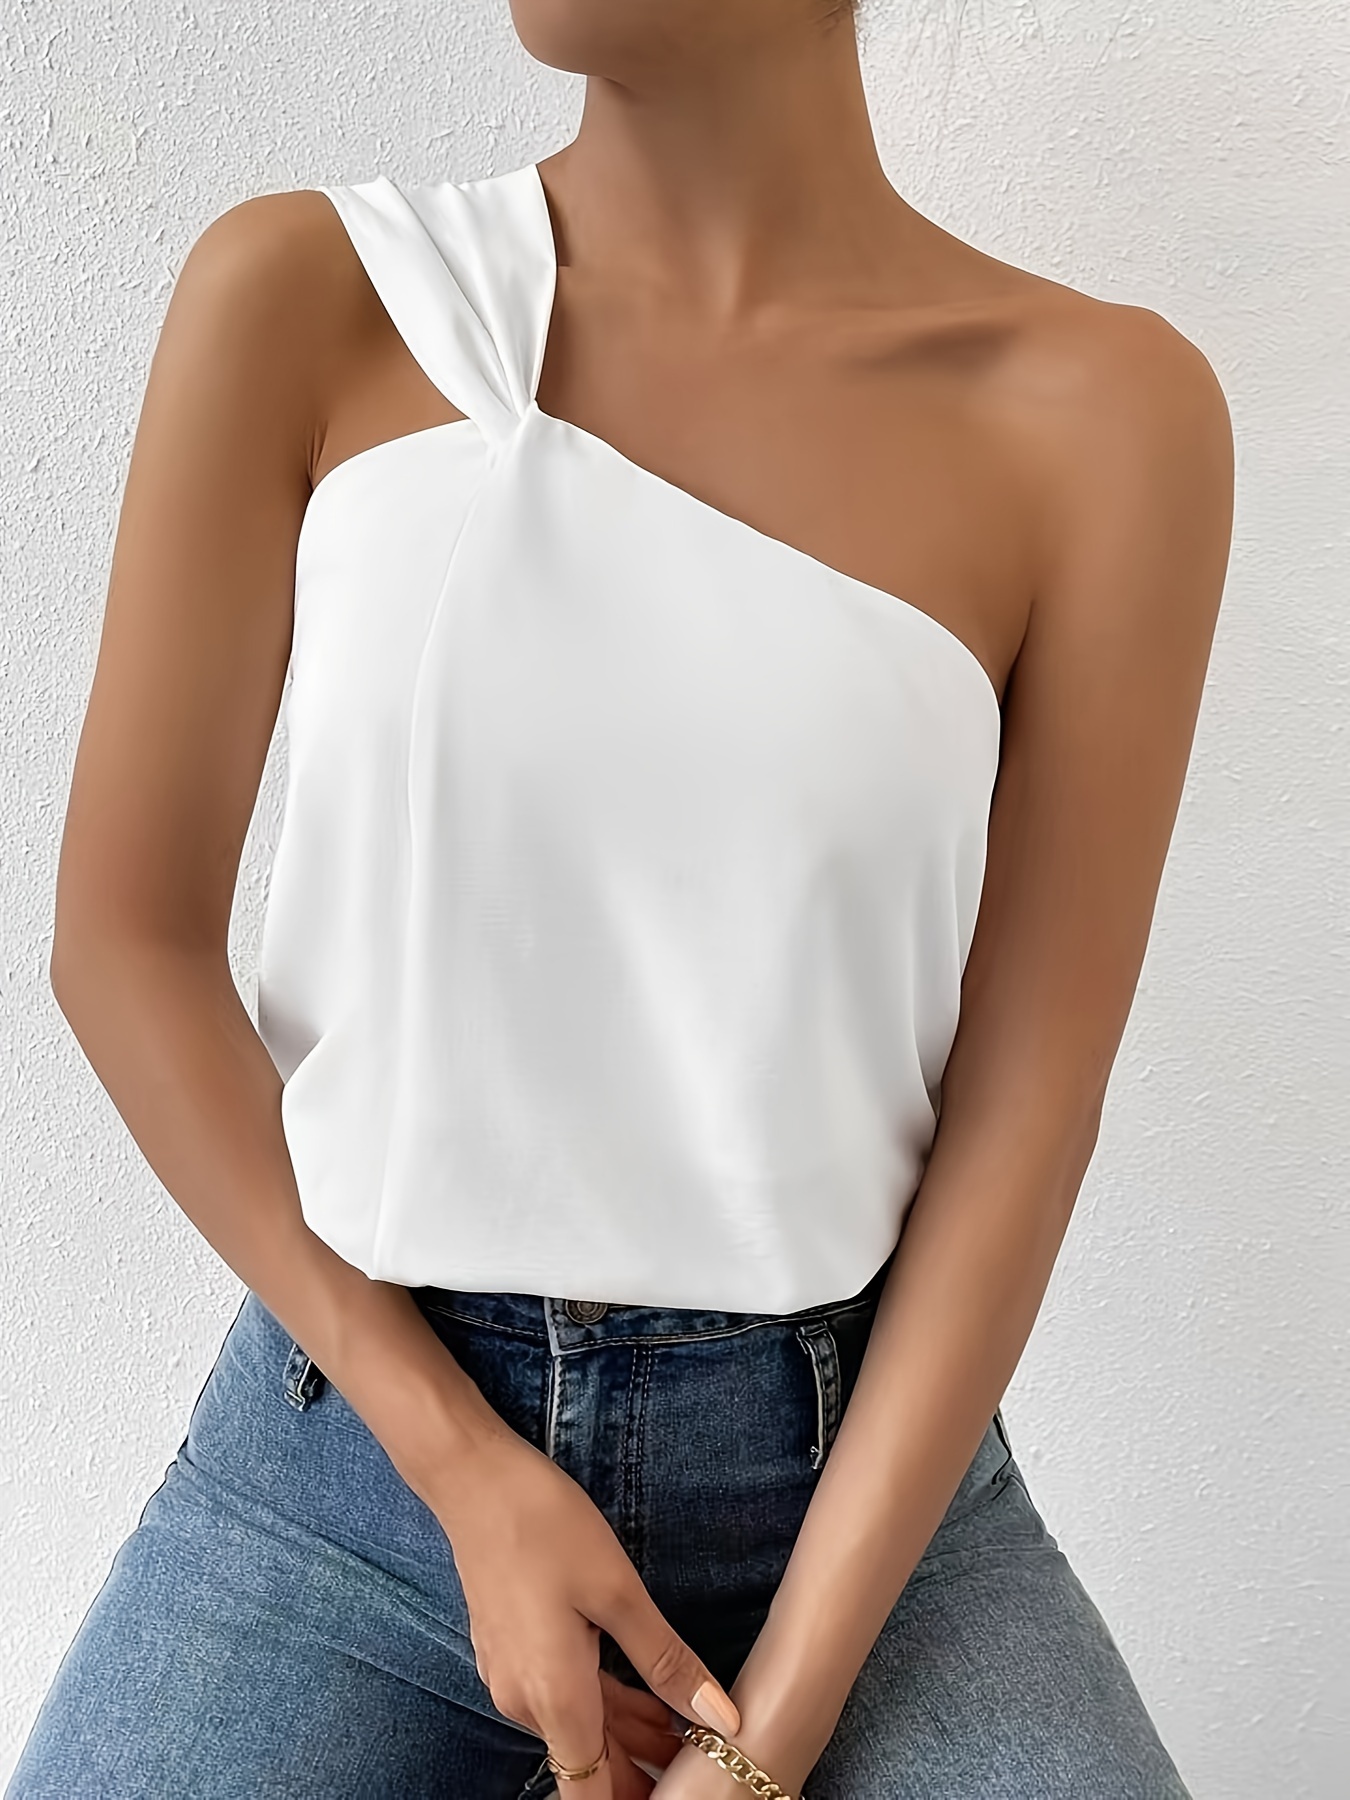 Brandy Melville archie tank —white ❀ sold out a ❀ only 1 ready